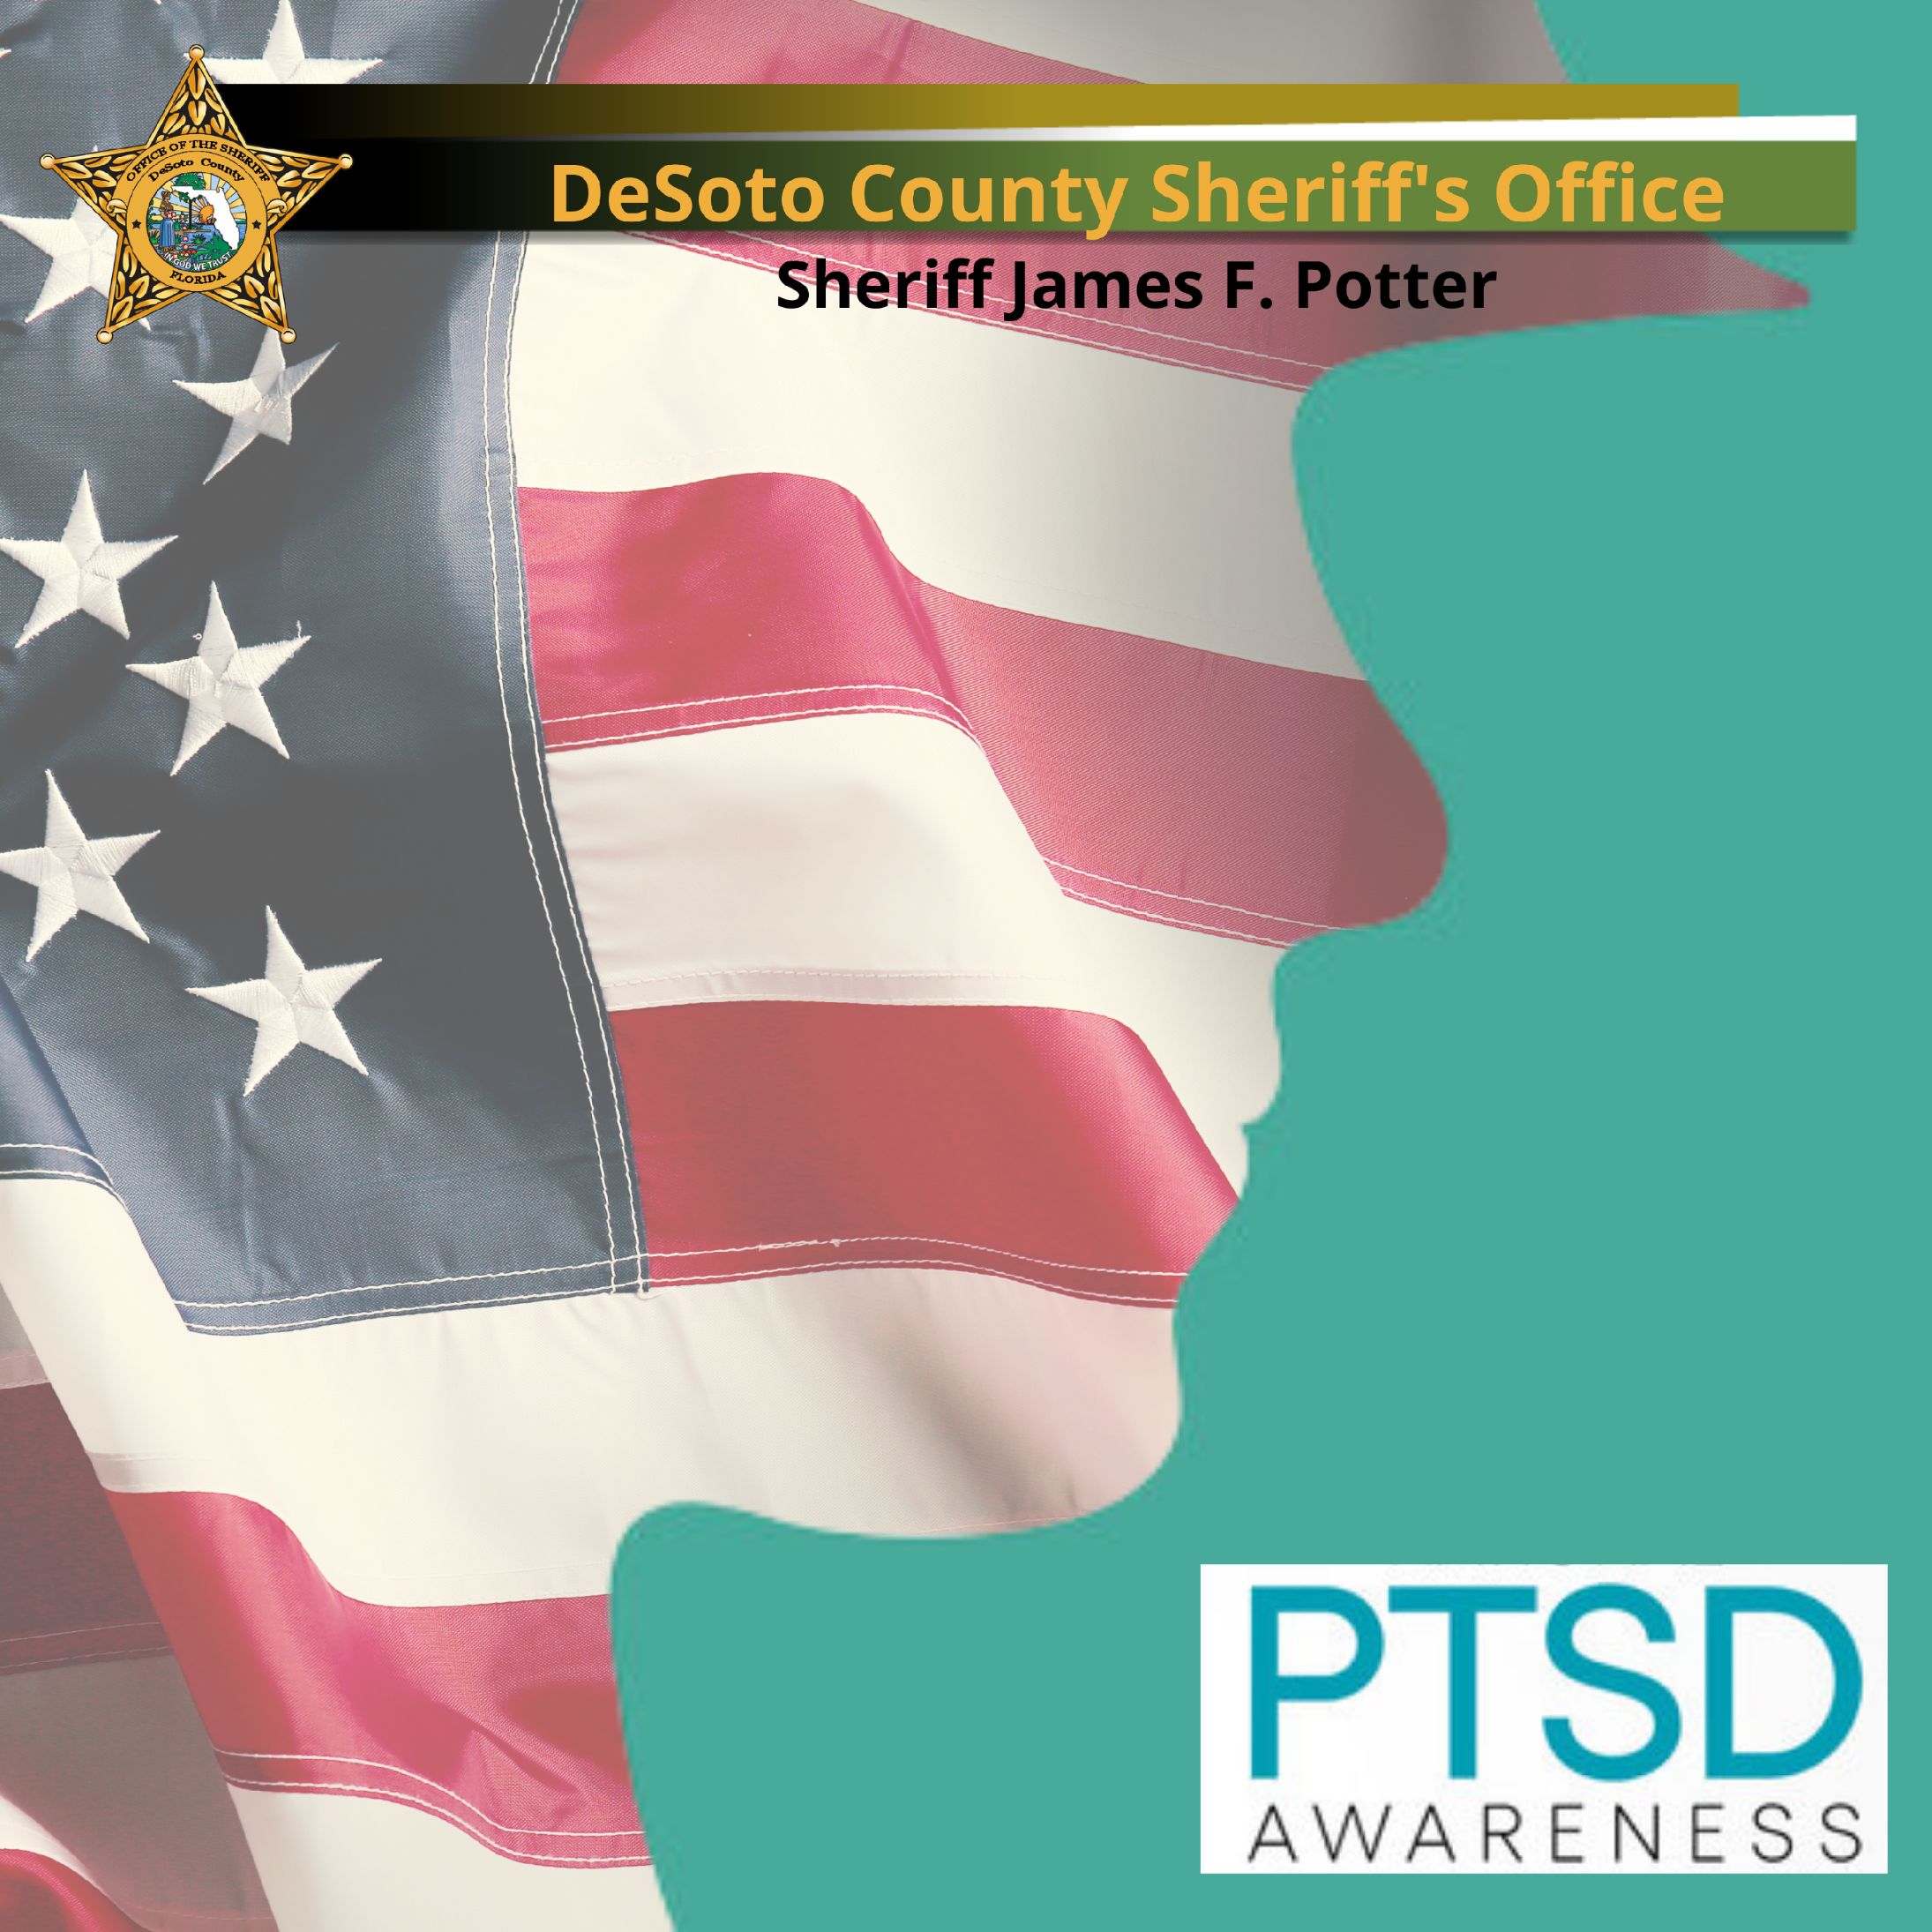 Sheriff Letter - Mental Health and PTSD Awareness - Copy